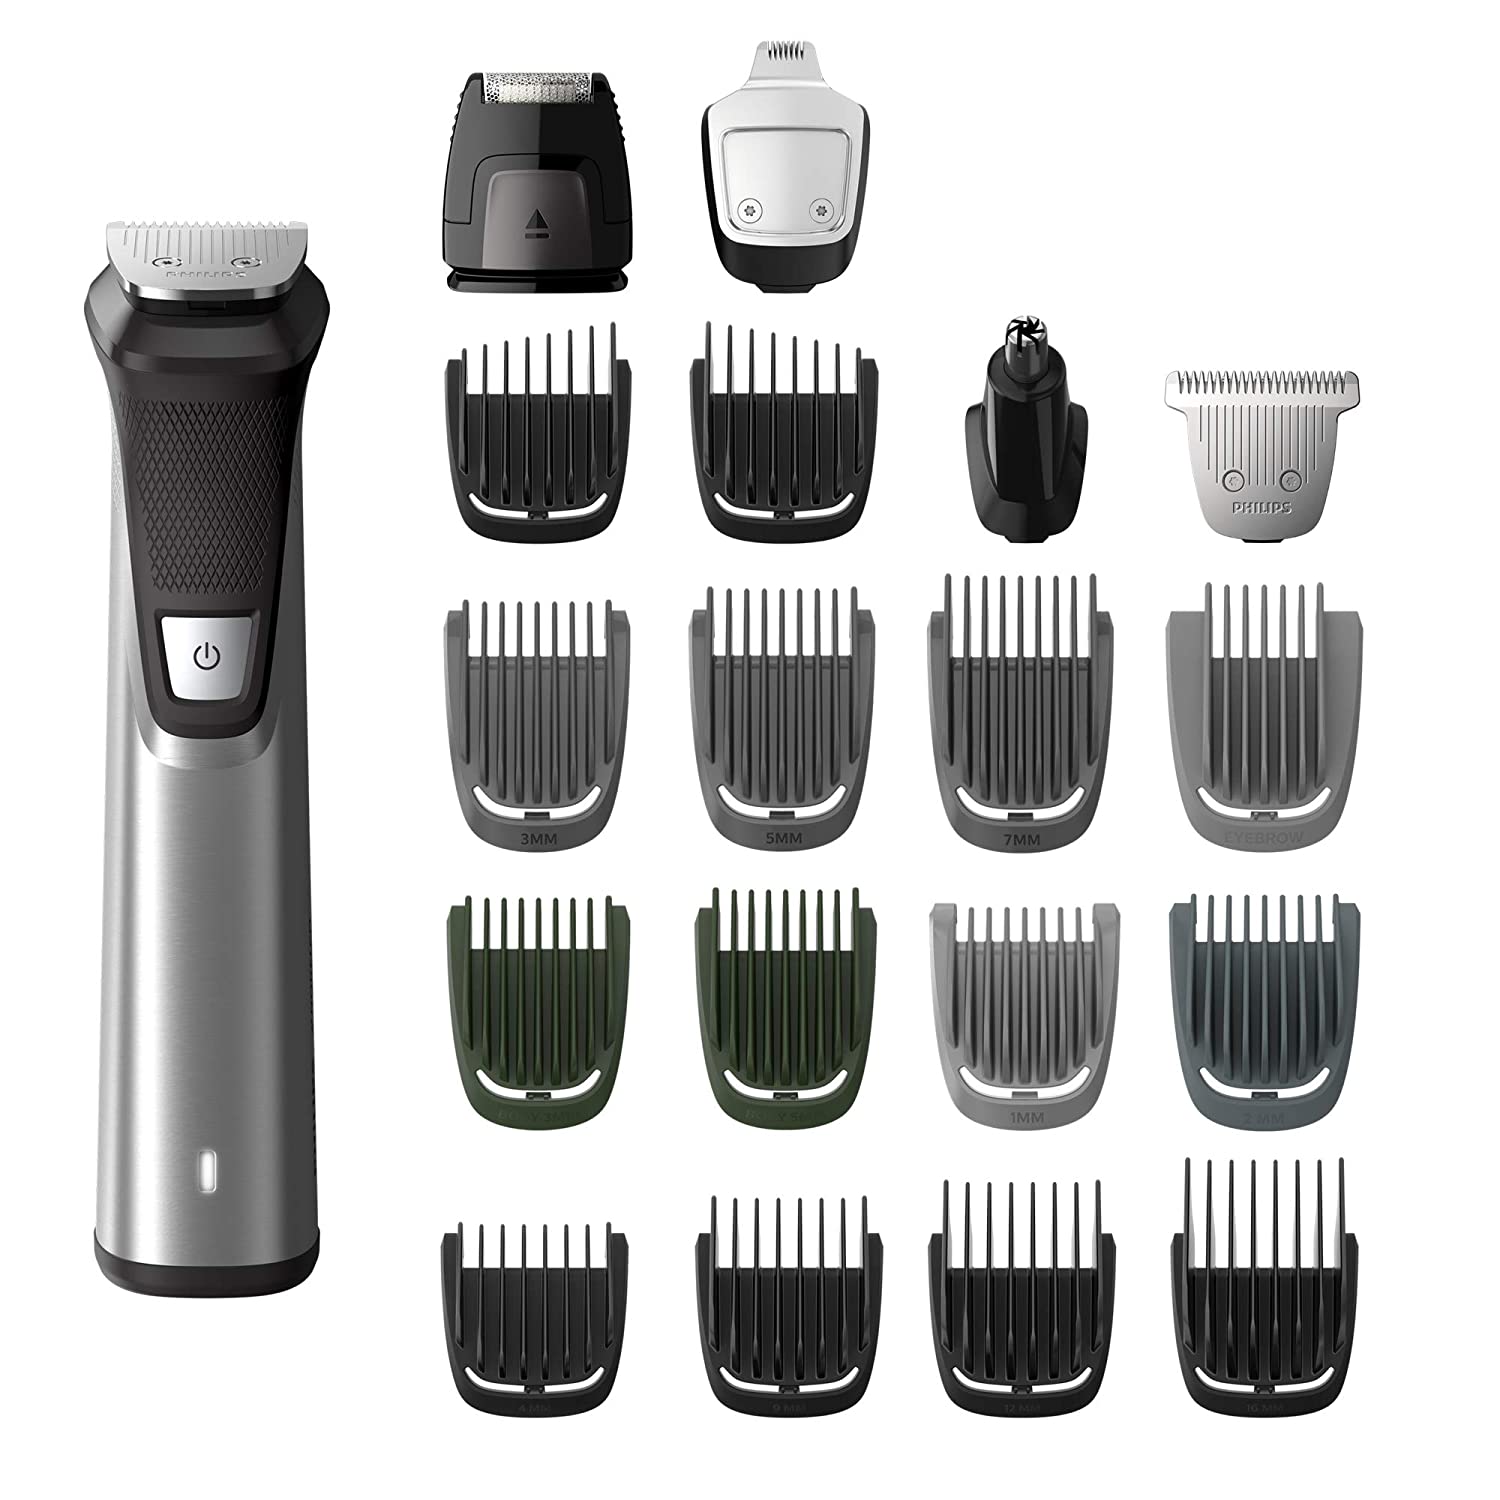 remington quick hair clippers